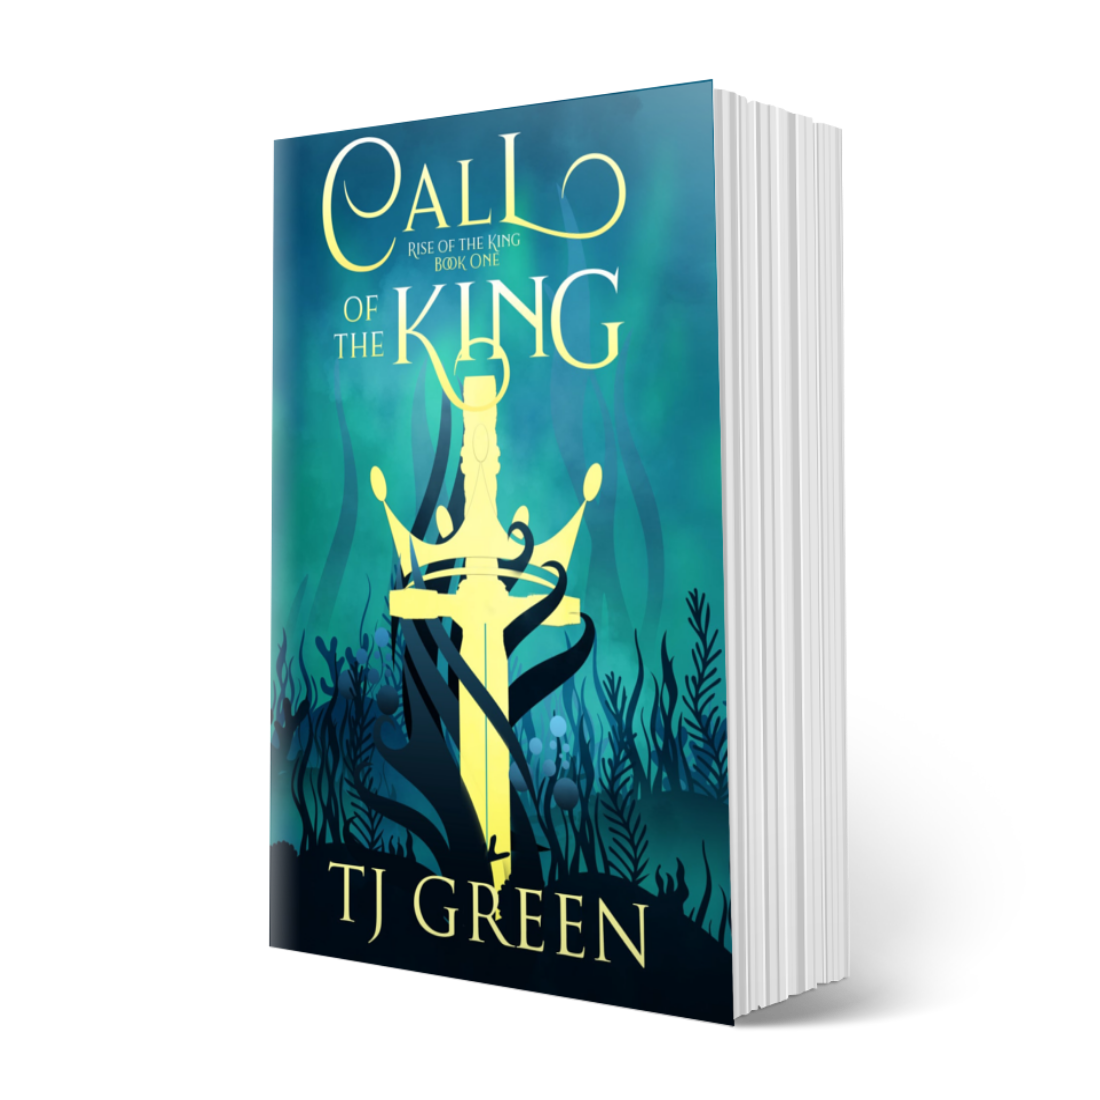 Call of the King, Arthurian Fantasy, YA Fantasy, sword and sorcery, mythical creatures.